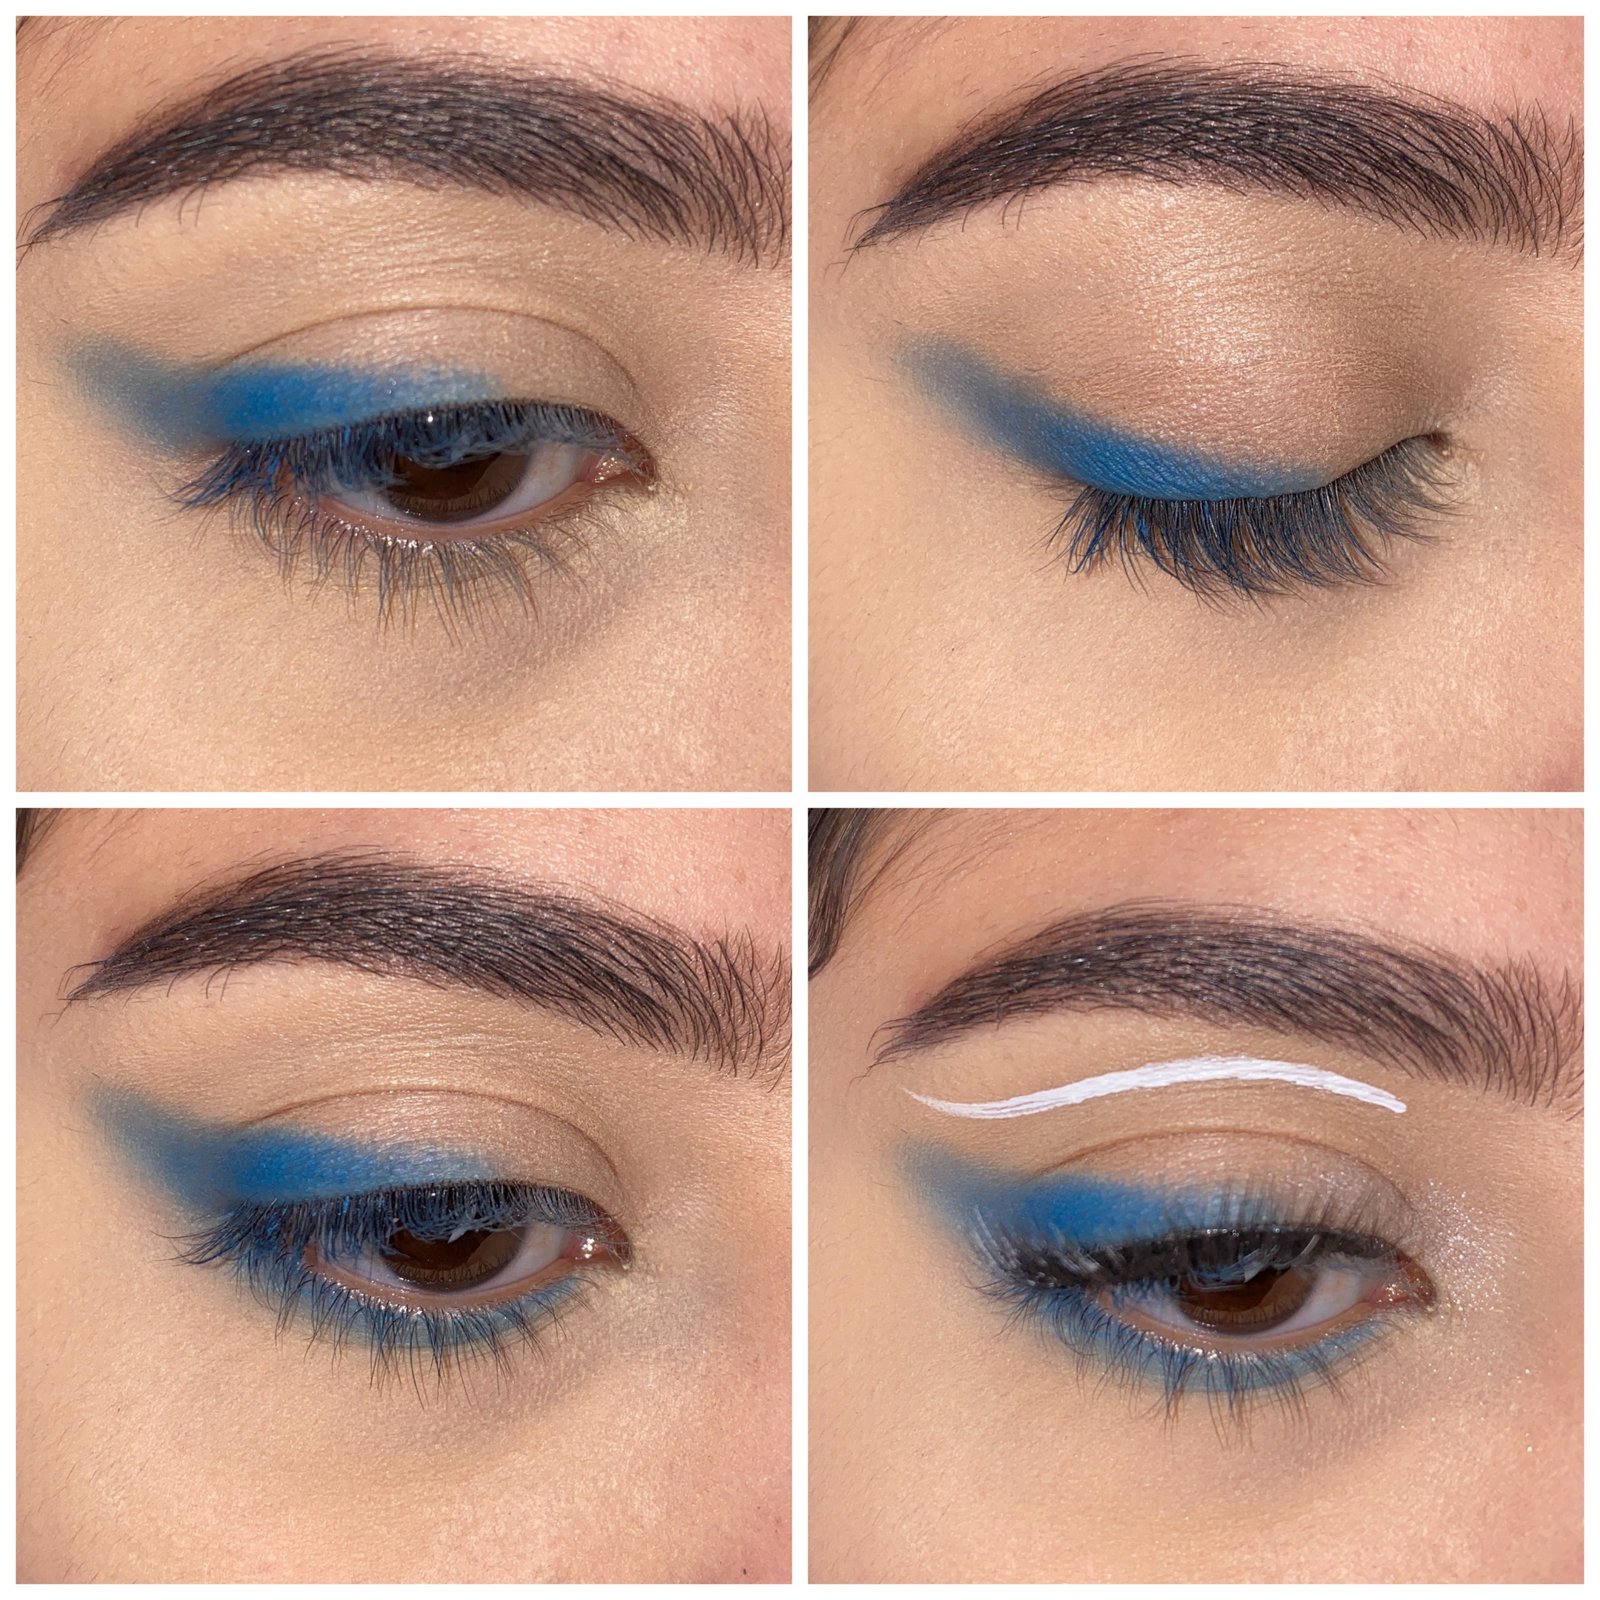 white and blue eyeliner makeup